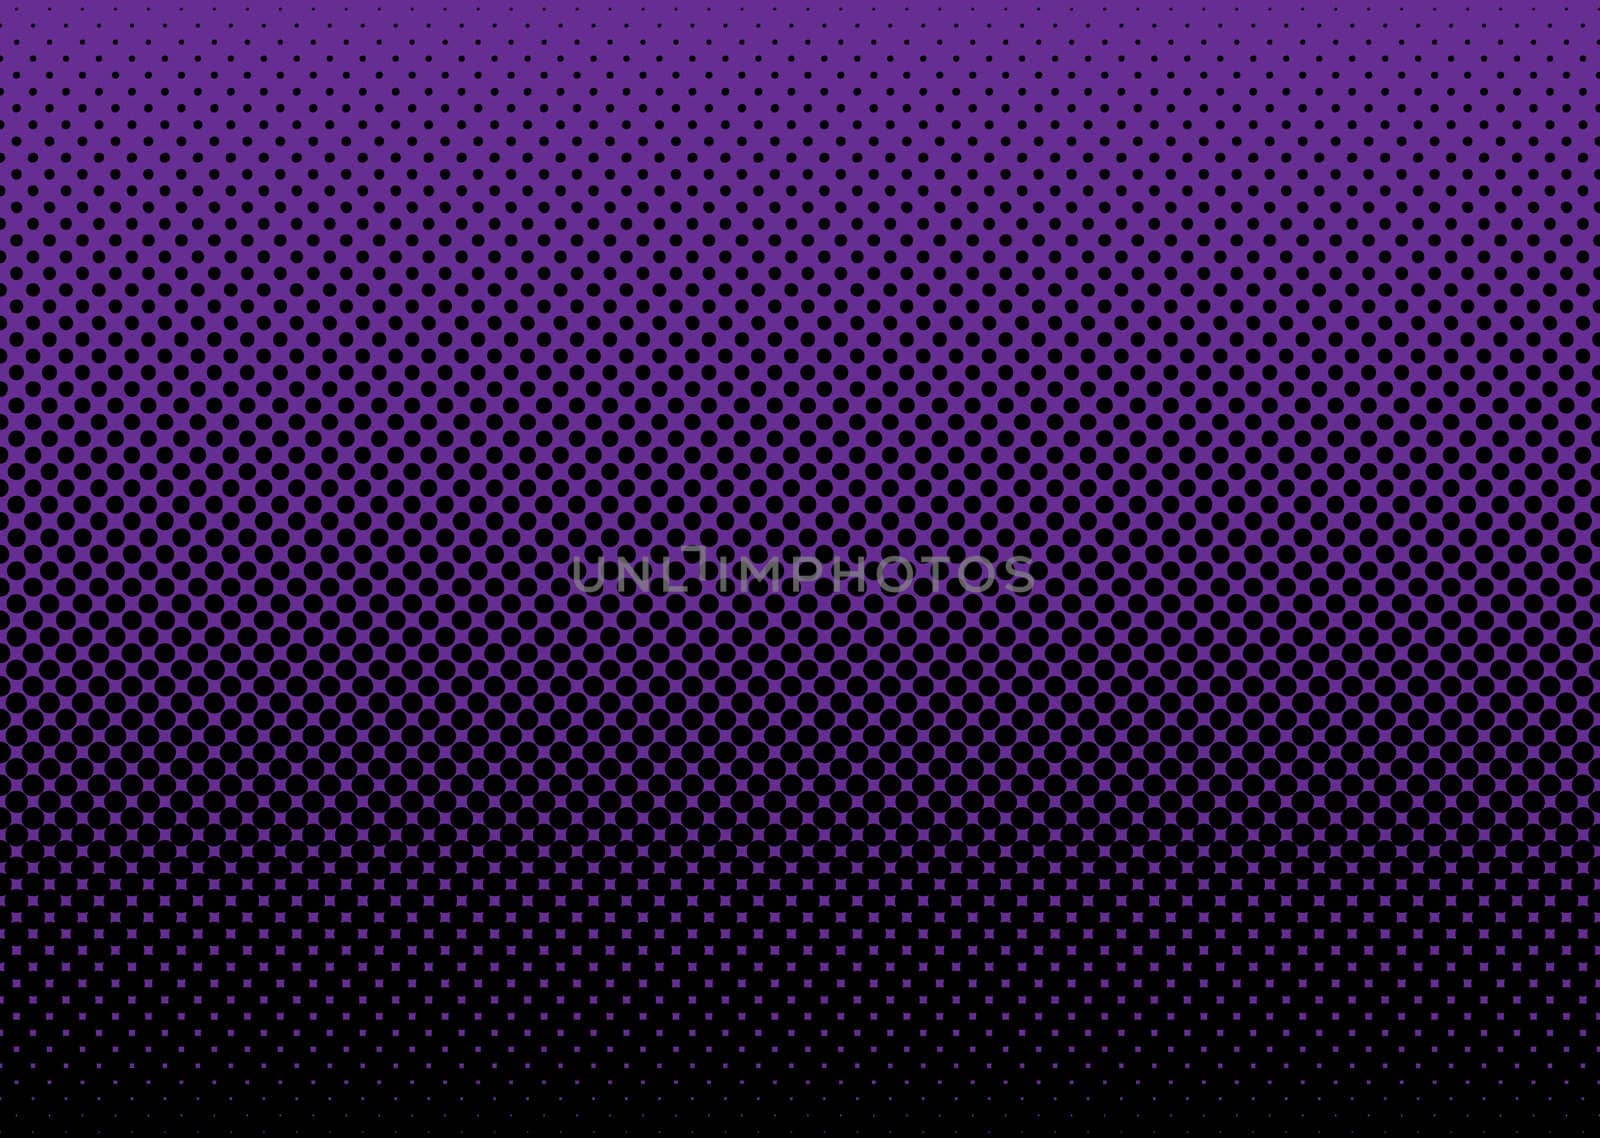 Abstract grunge halftone dot background with purple and black dots